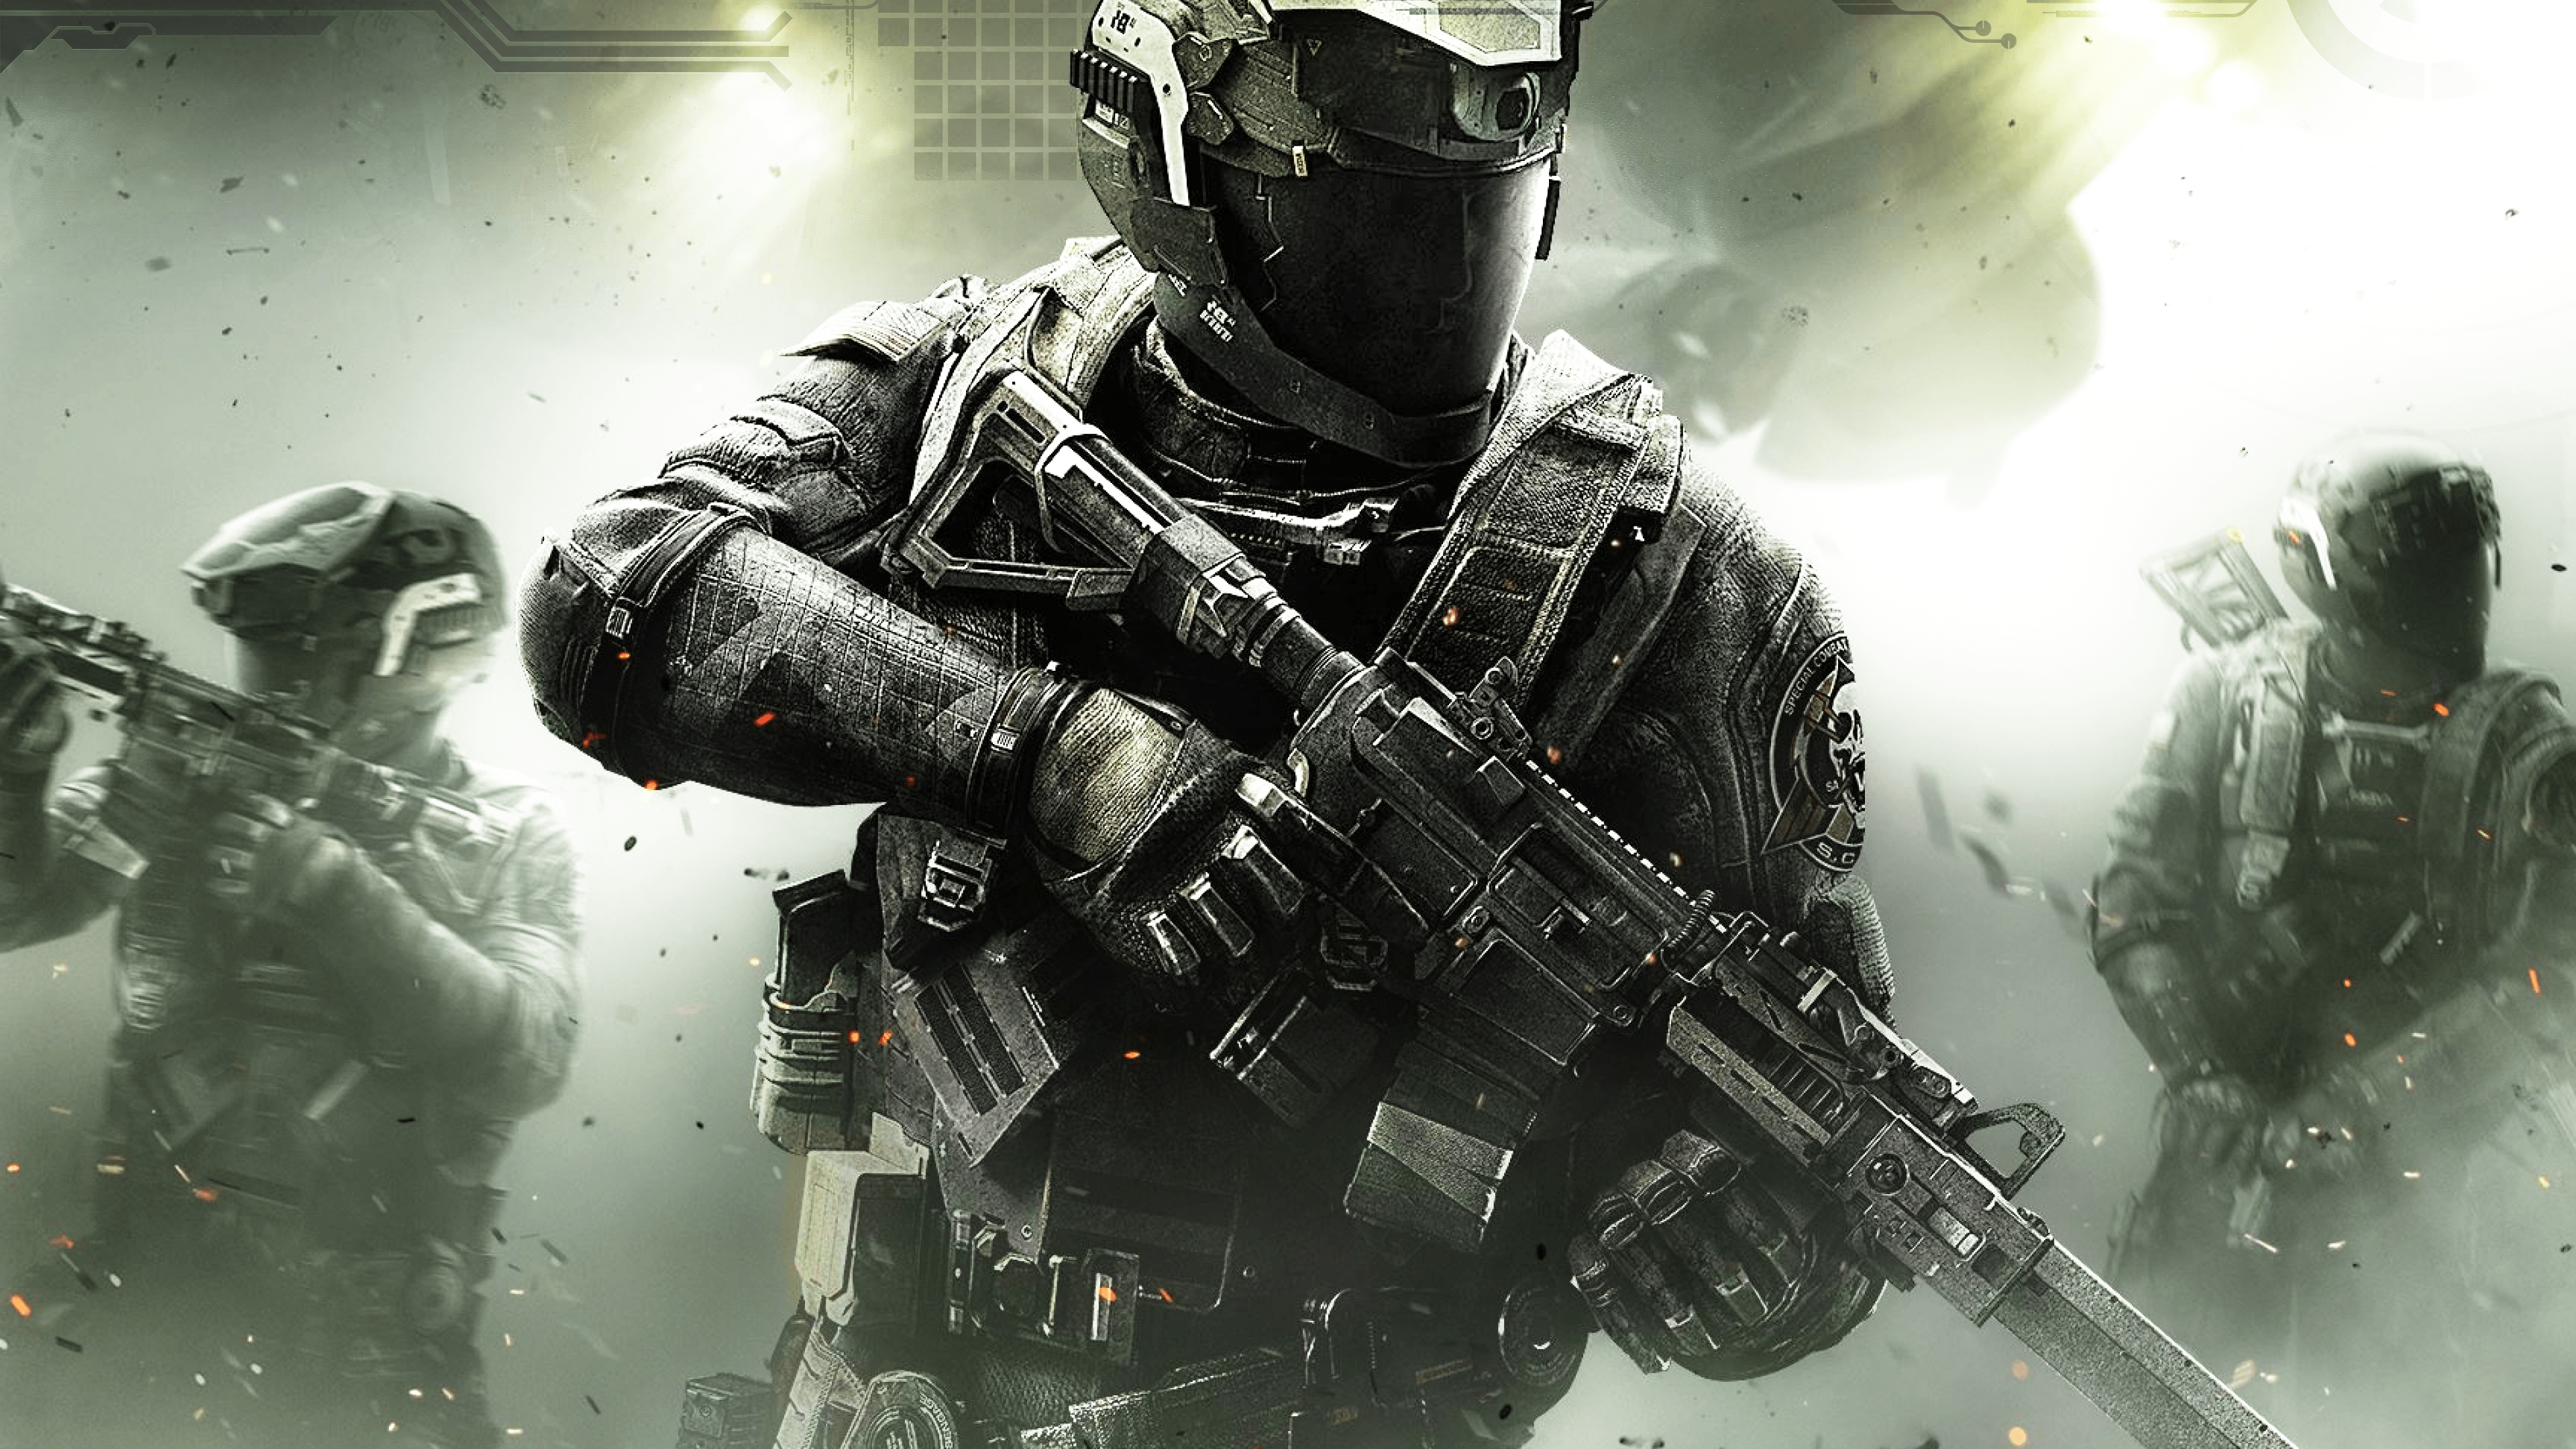 52+ Cool Call of Duty Wallpapers: HD, 4K, 5K for PC and Mobile